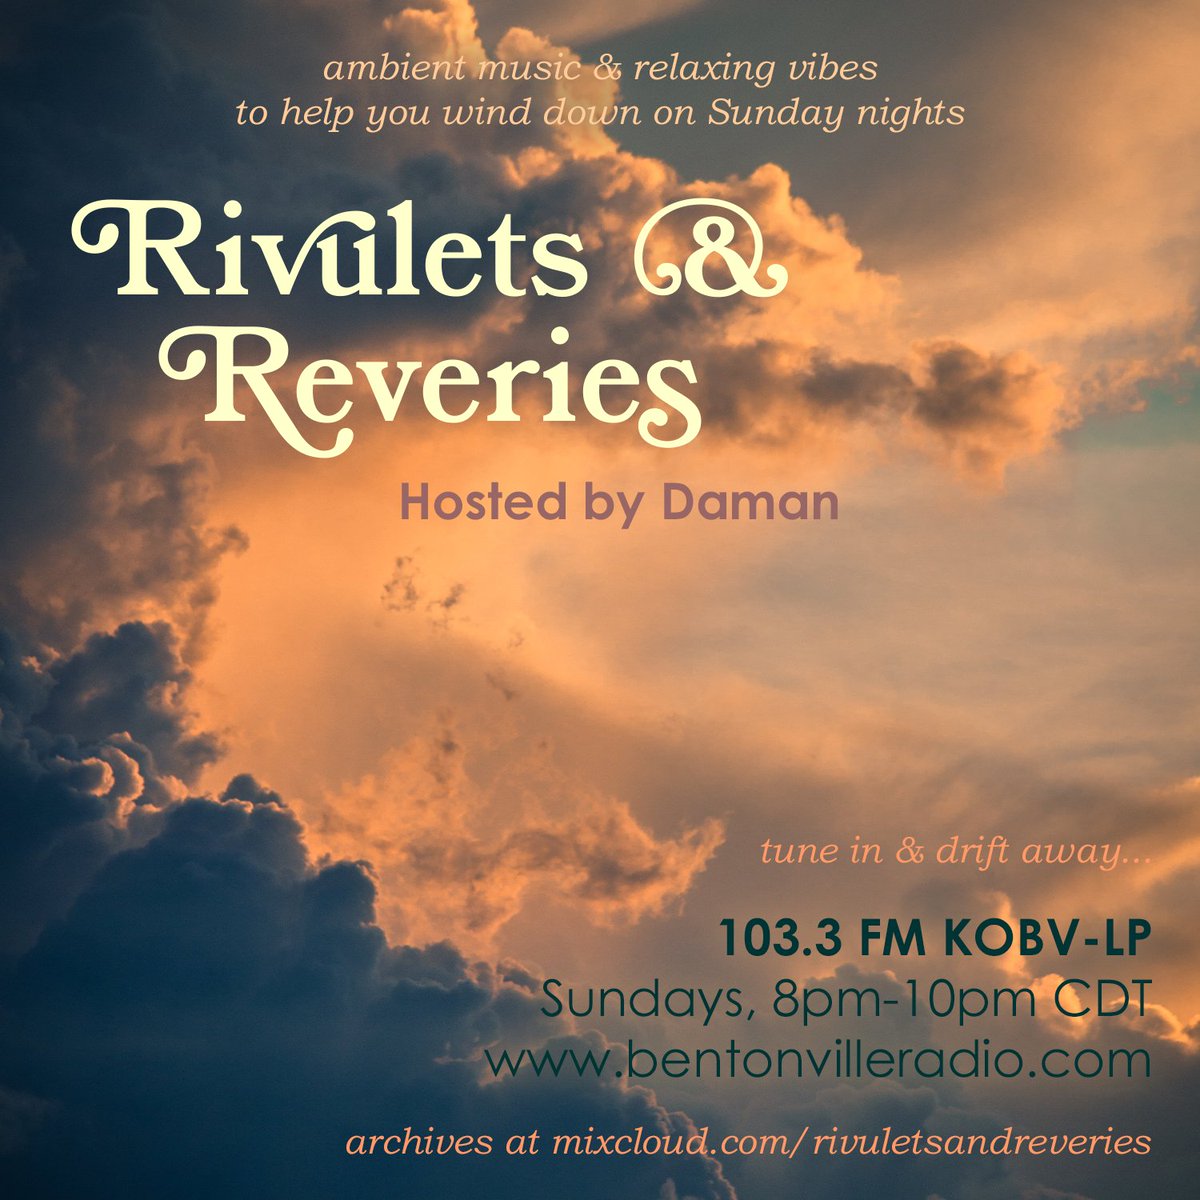 RIVULETS & REVERIES So wonderful to be part again with Metric System 1981 tonight at 8pm in RIVULETS & REVERIES - the fantastic ambient radio show by DAMAN A. HOFFMAN at bentonvilleradio.com #rivuletsandreveries #damanahoffman #ambient #spotify #metricsystem1981 #radio